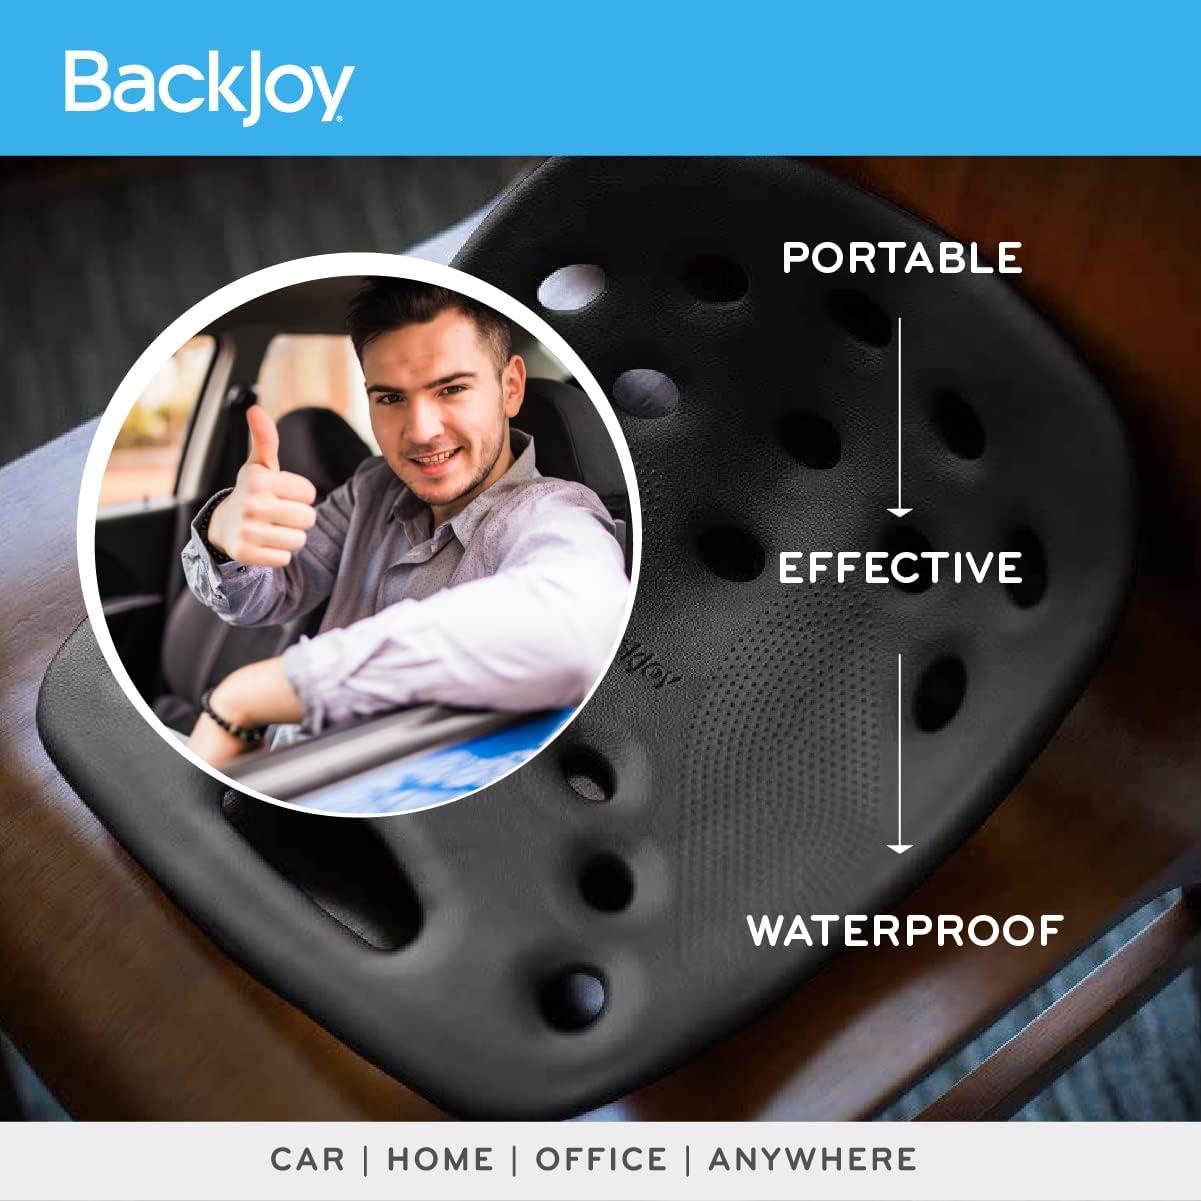 BackJoy Posture Seat Pad, Ergonomic Pressure Relief, Hip & Pelvic Support  to Improve Posture, Home, Office Chair, Car Seat, Waterproof, Fits S-L  Hips